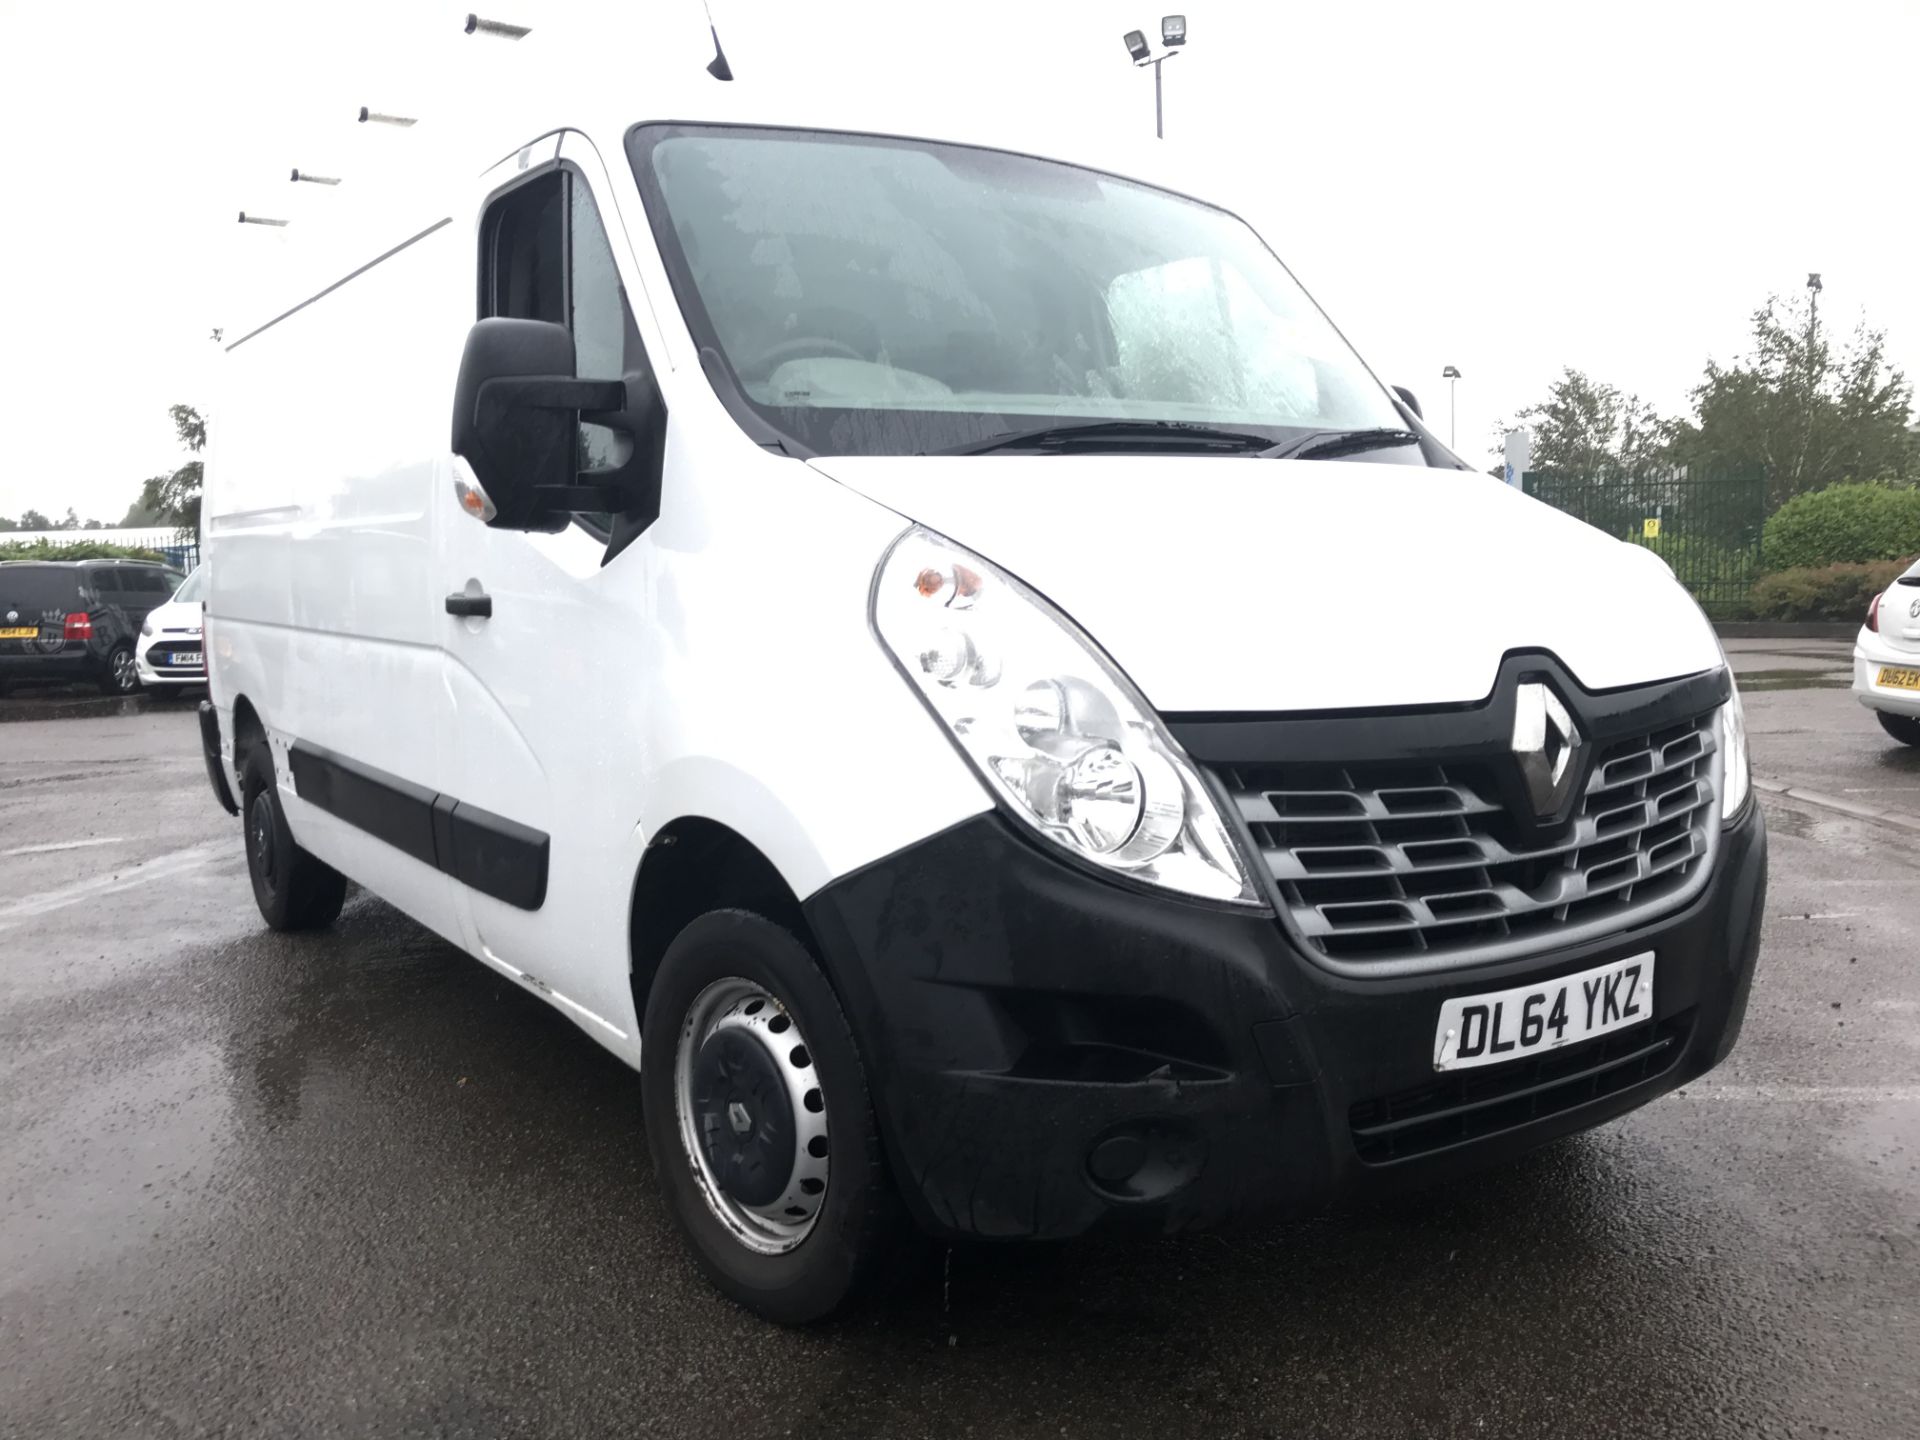 (ON SALE) RENAULT MASTER MM35 BUSINESS EDITION 2.3DCI (125) - ONLY 68K MILES! - 1 KEEPER -NEW MODEL